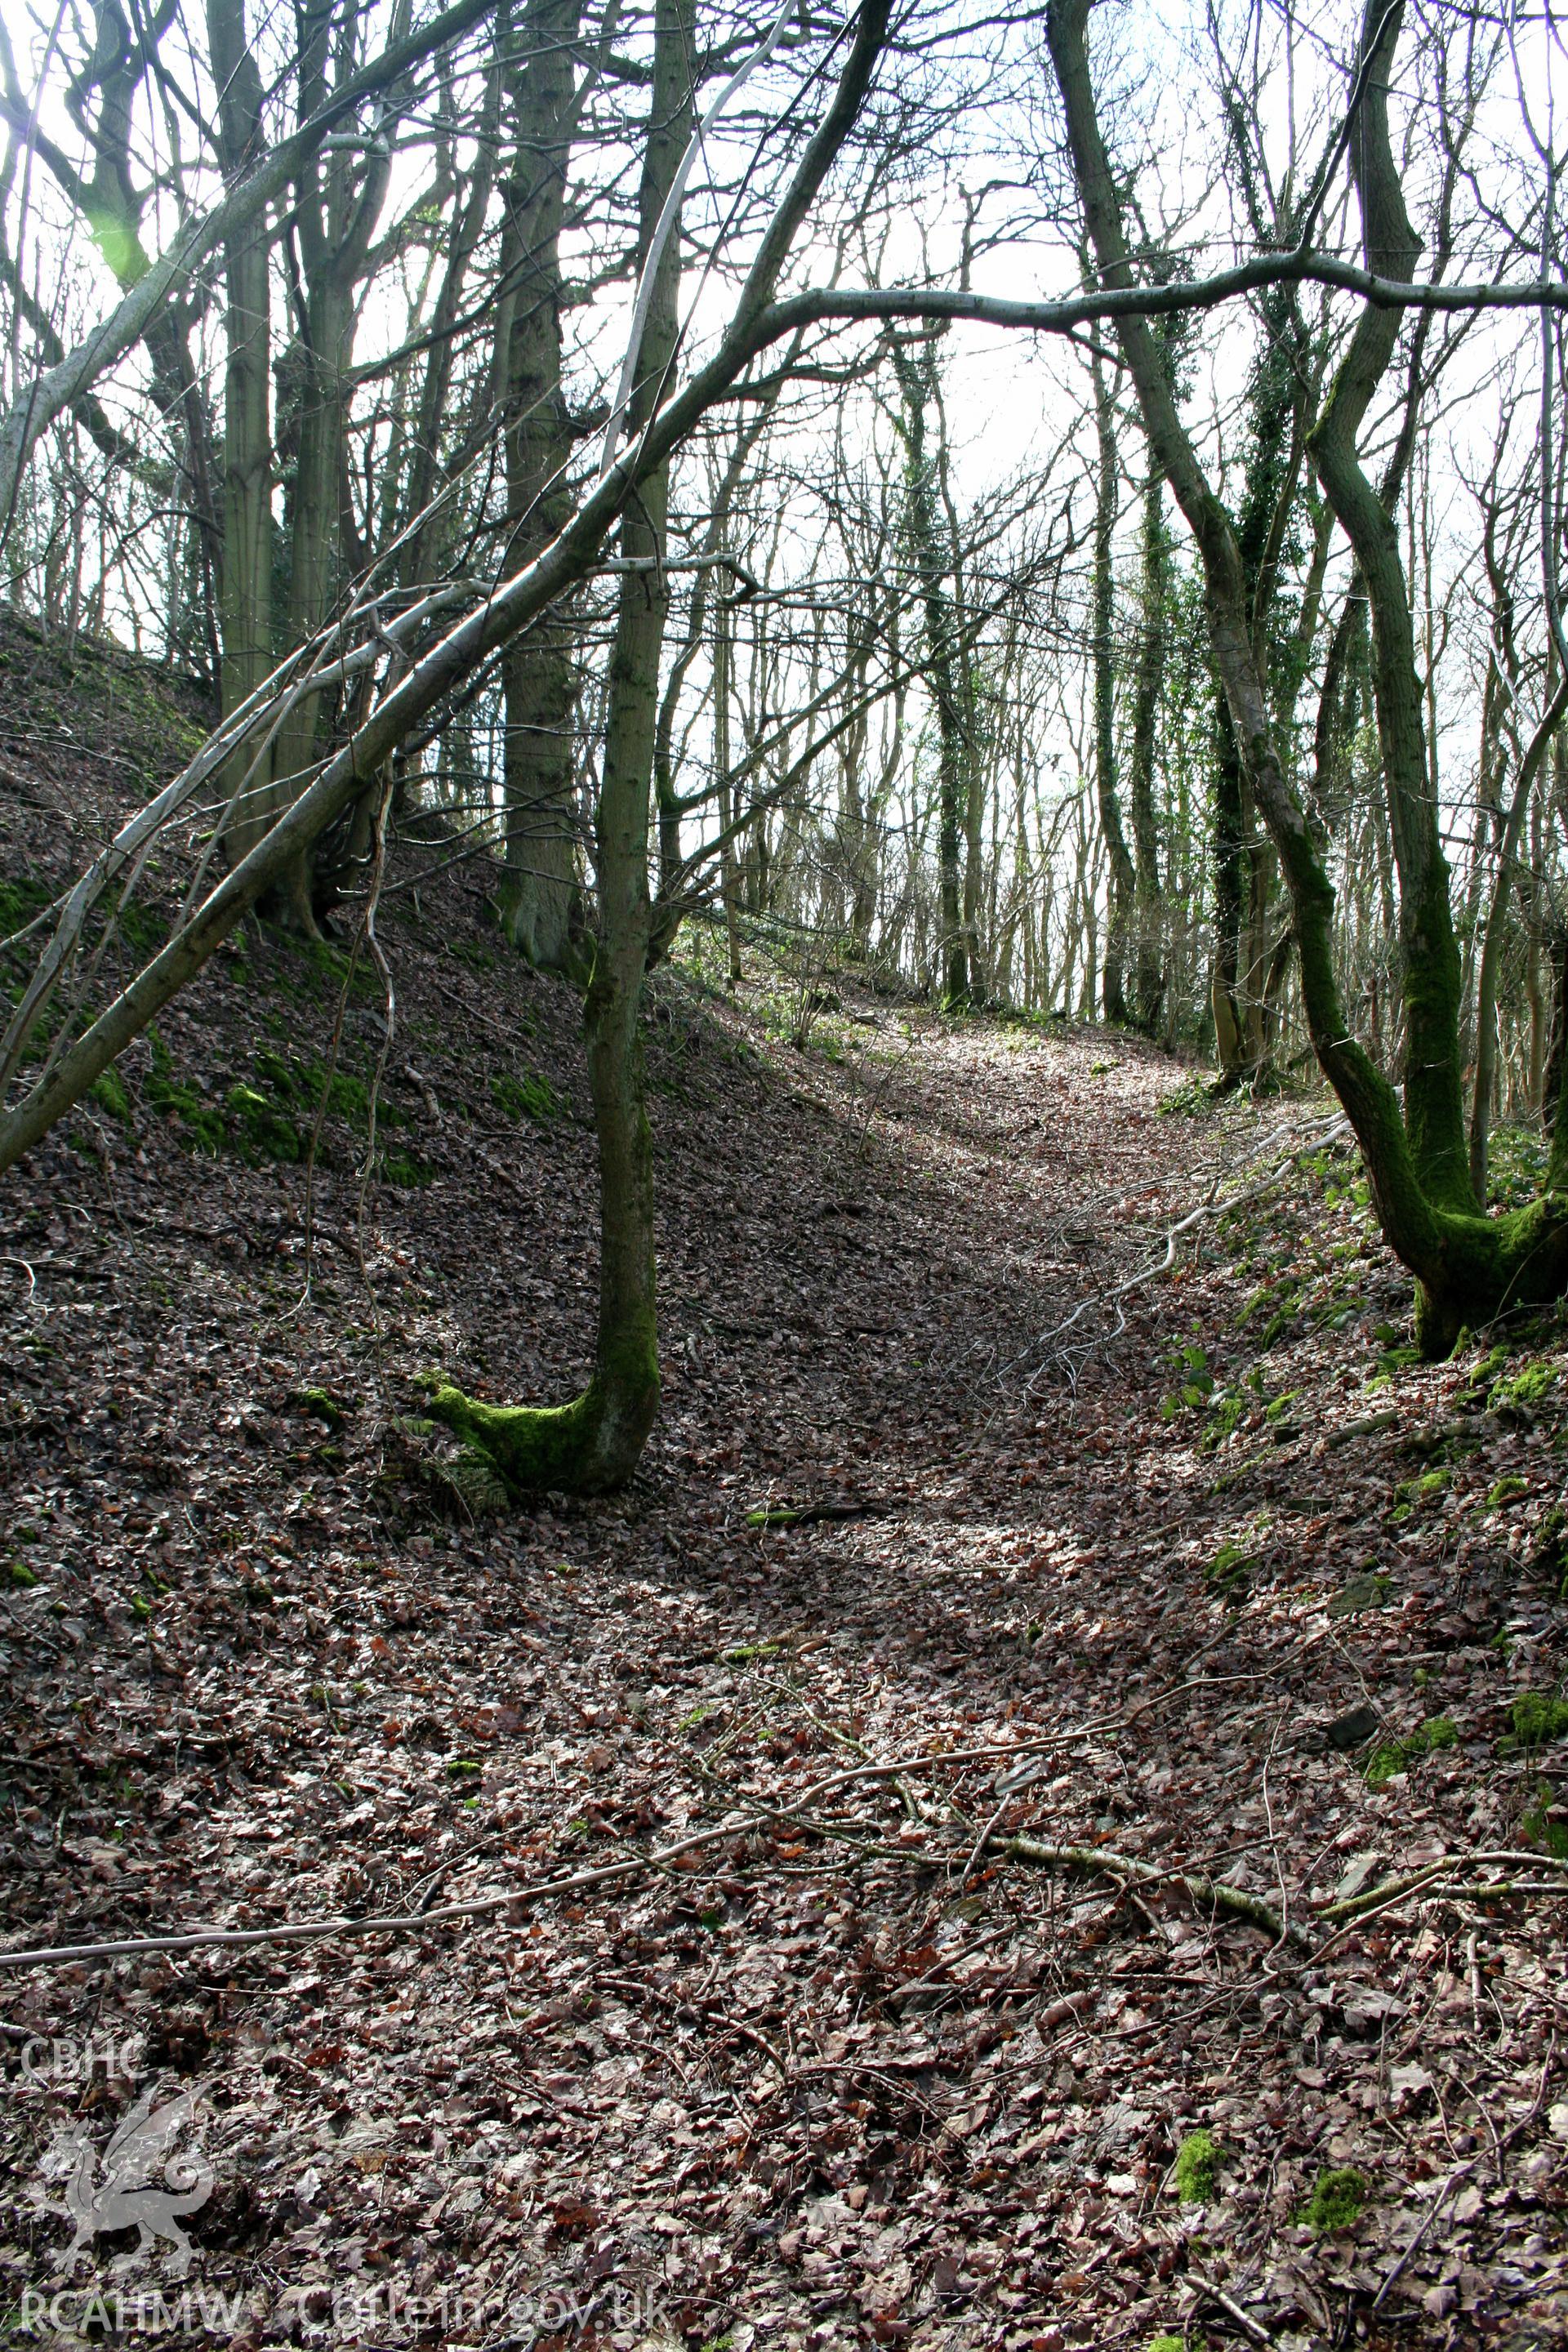 Gaer Fawr Hillfort. Looking south along the ditch of the western ramparts towards the west entrance.